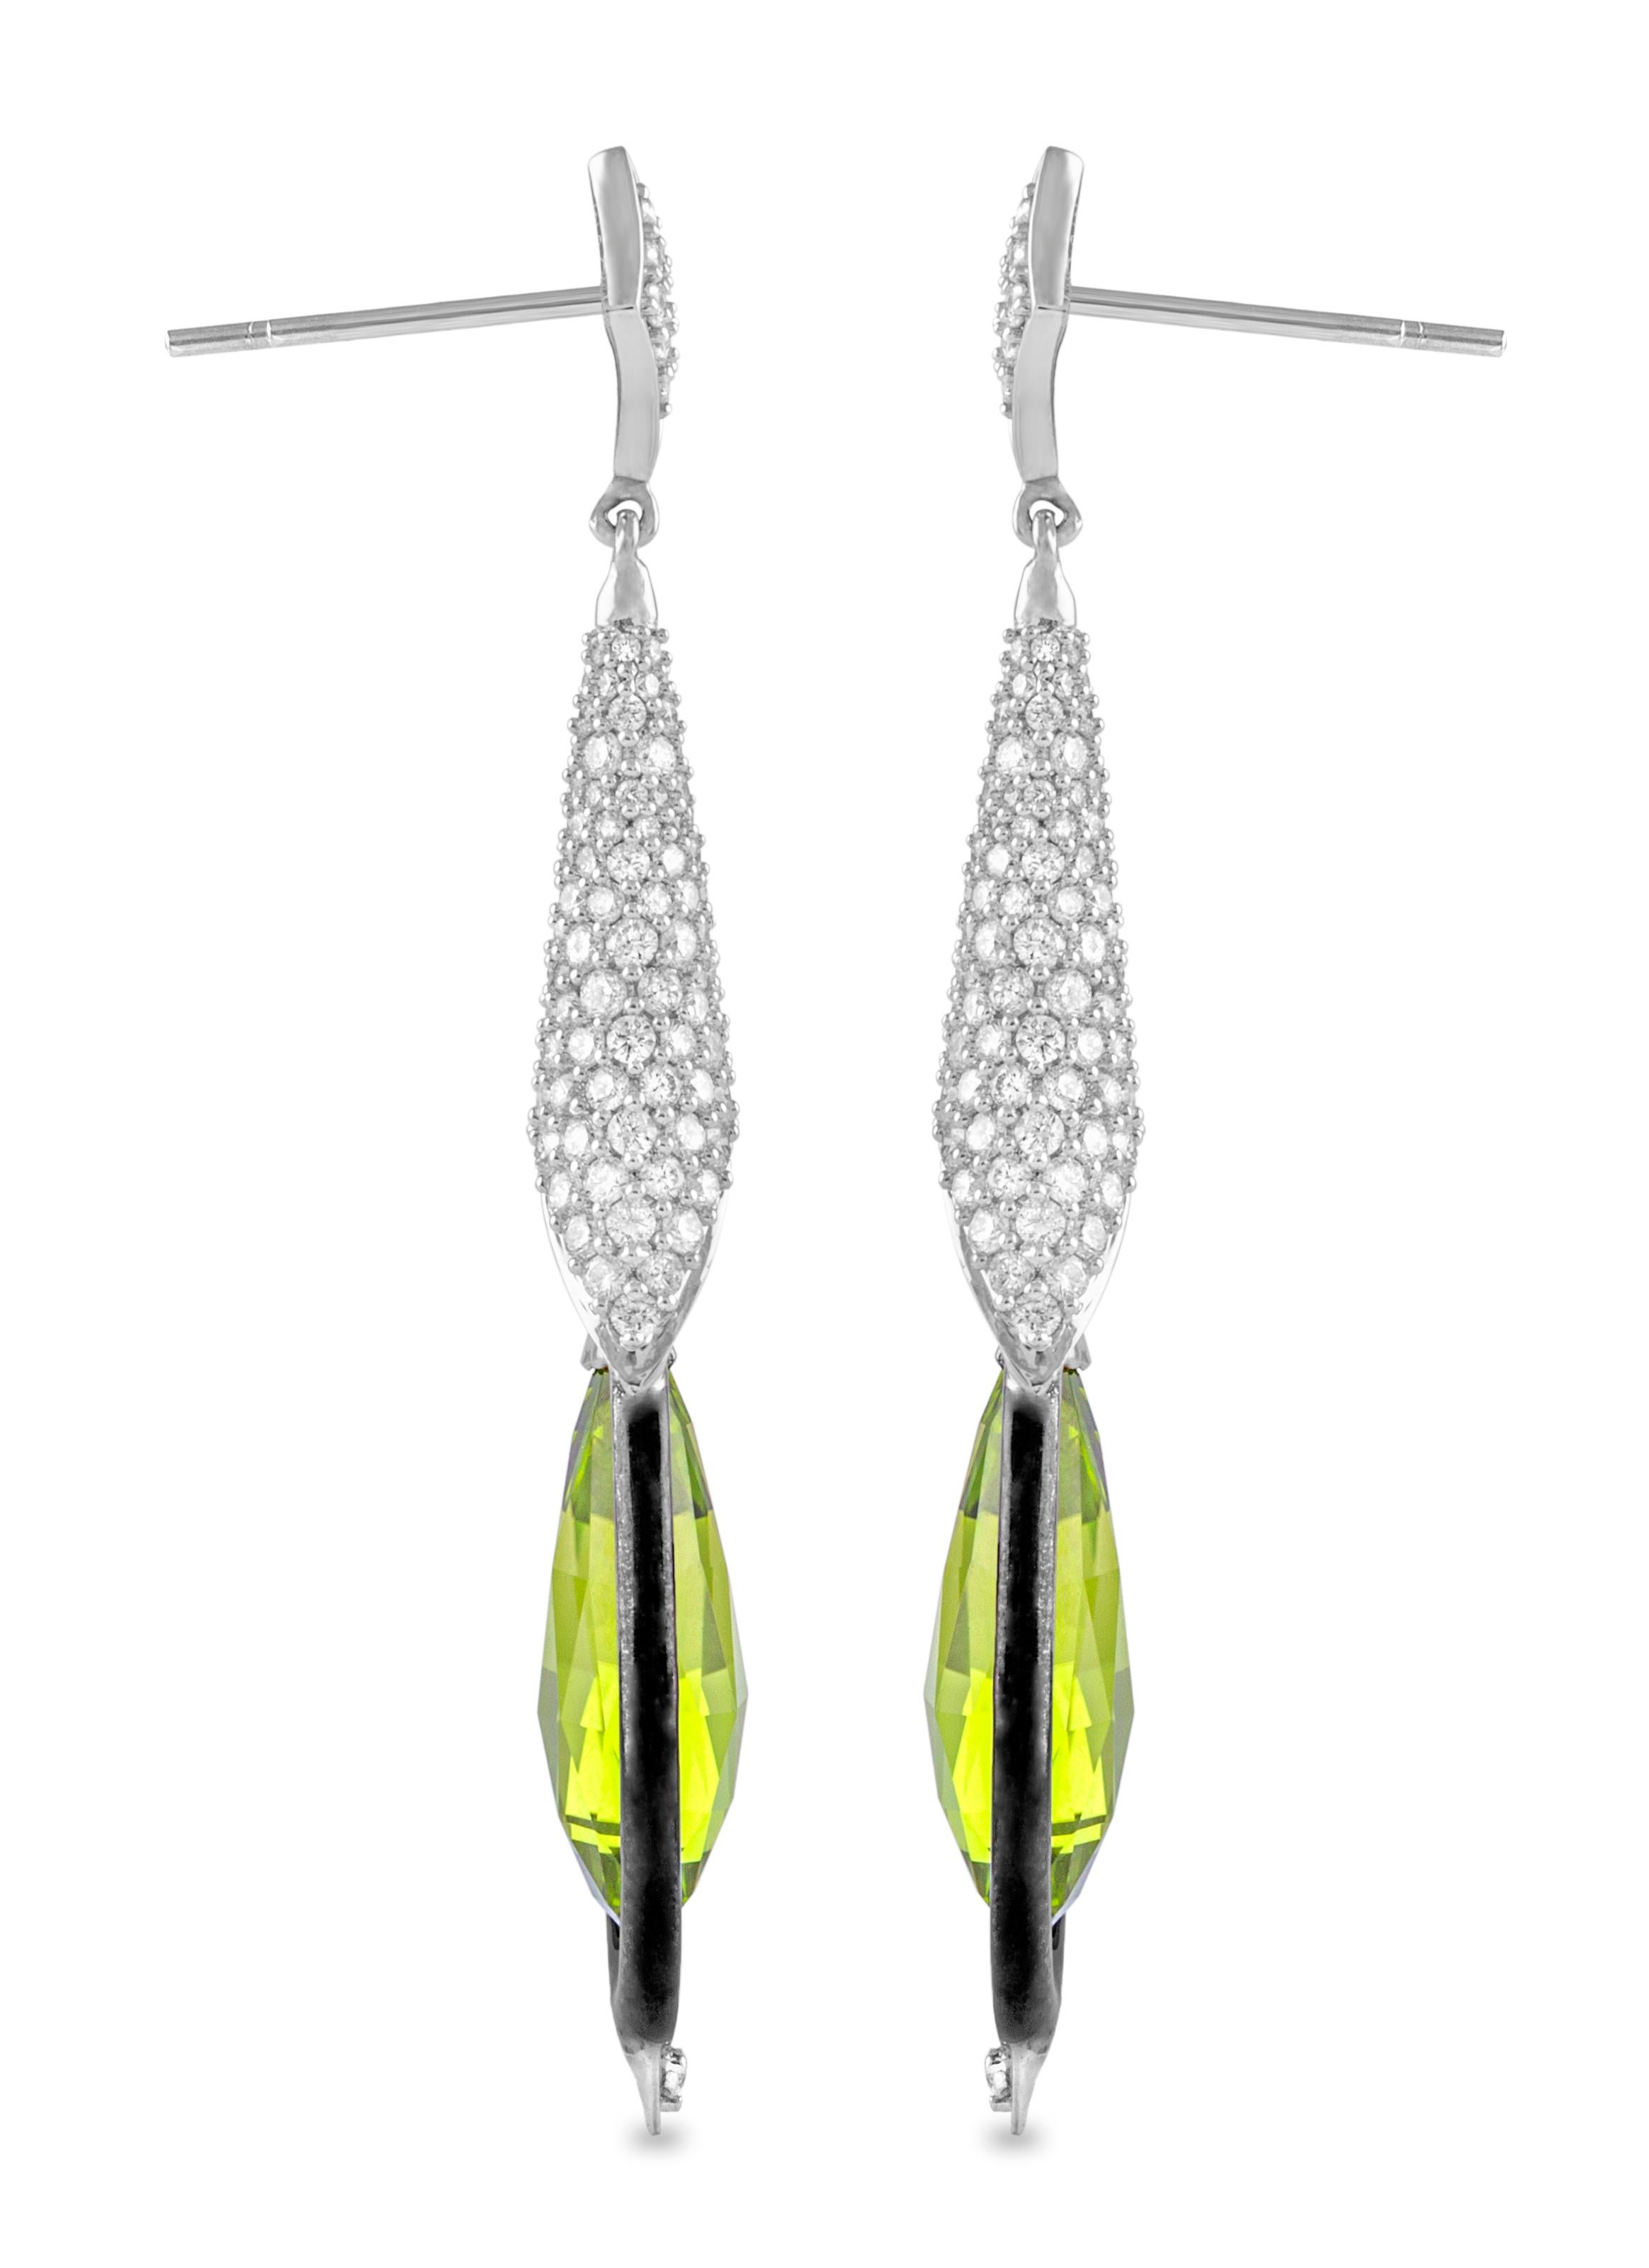 Contemporary 18 Karat White Gold Peridot and Diamond Earrings For Sale